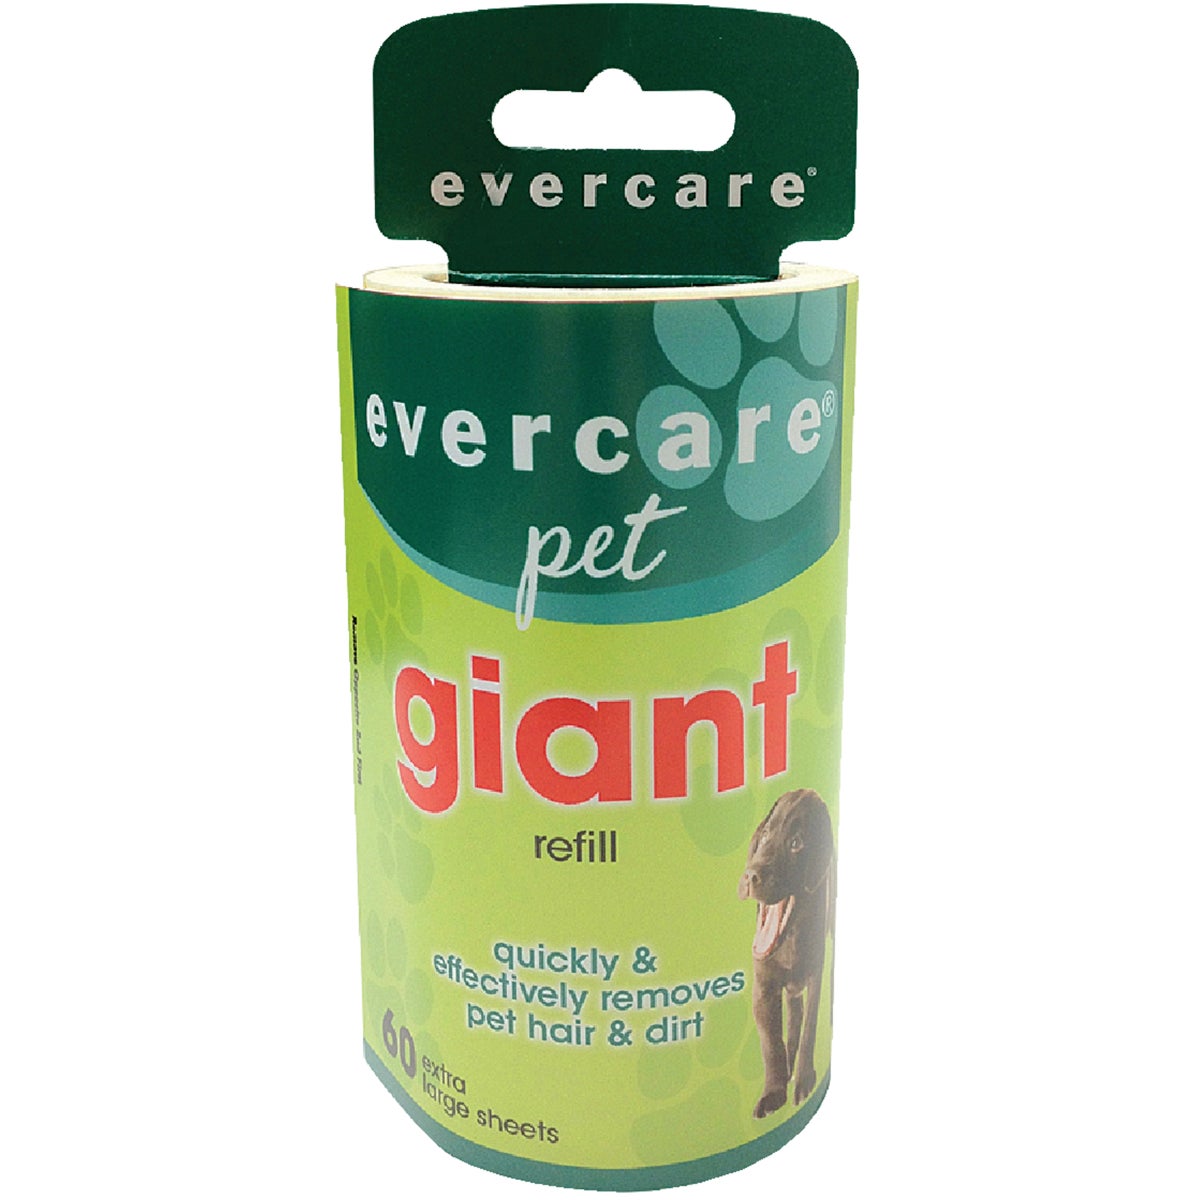 Evercare Pet 36.4 Ft. x 4.6 In. Giant Refill Roll Pet Hair Remover